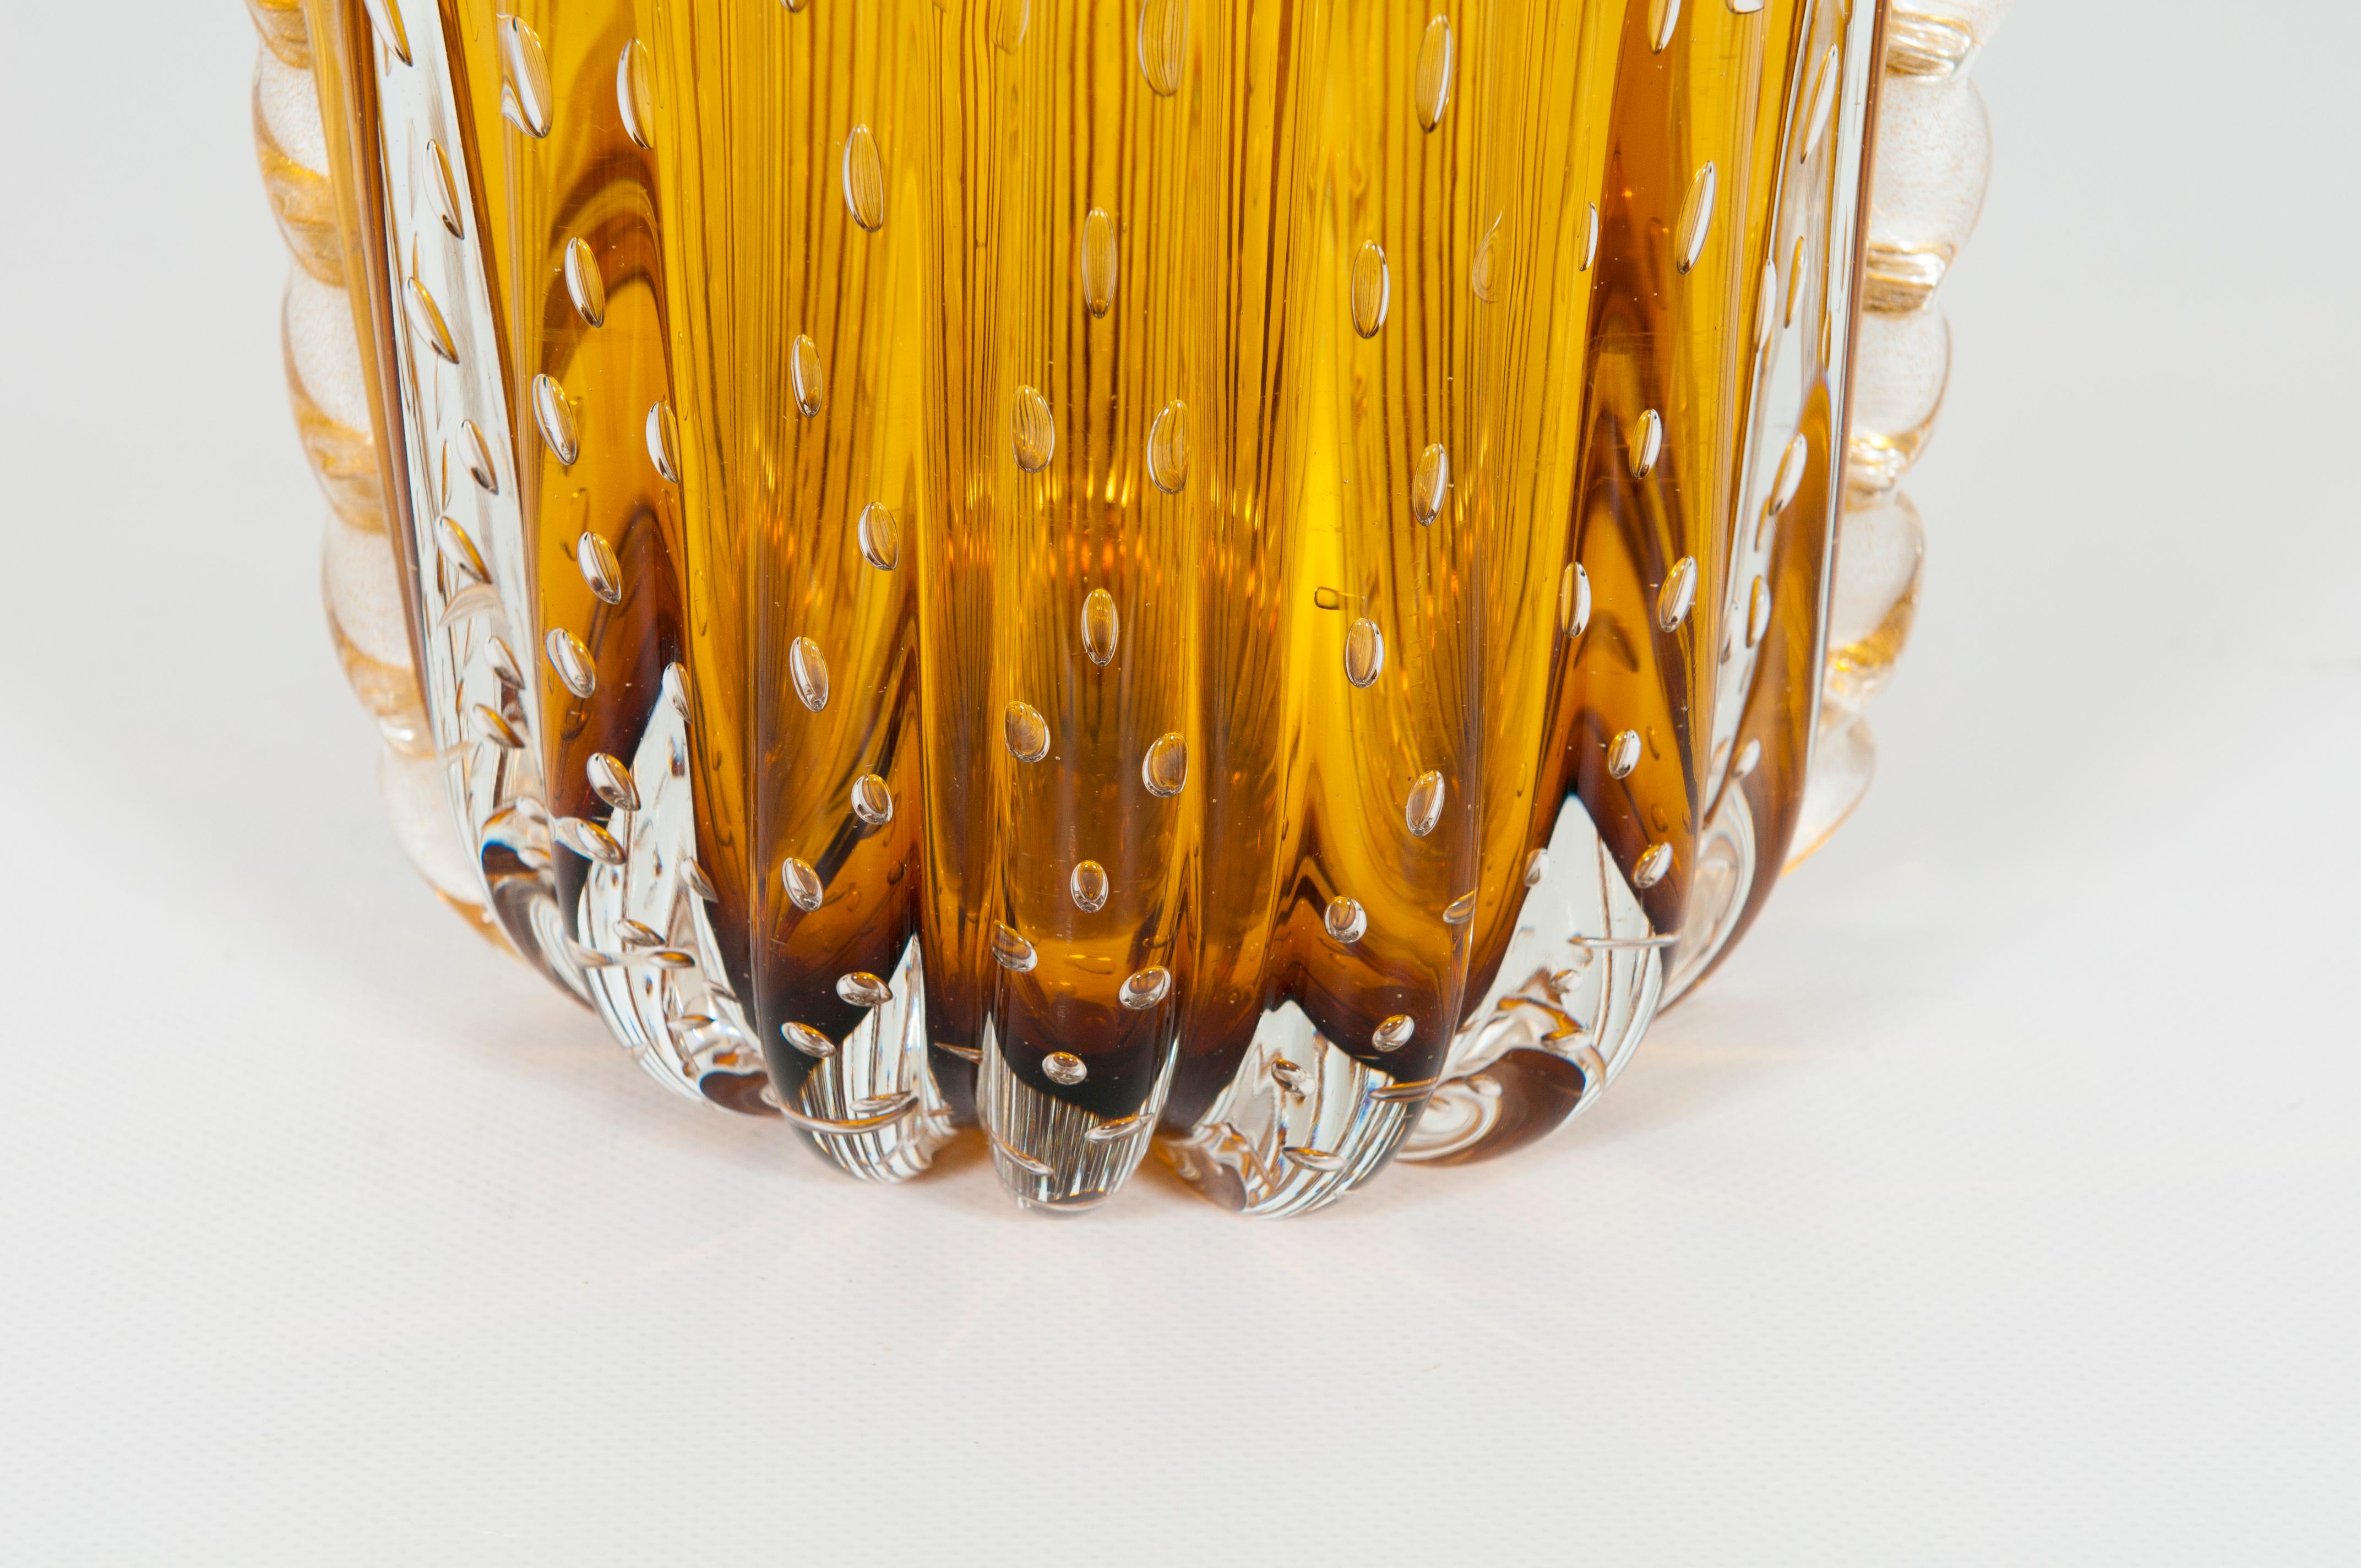 Hand-Crafted Amber Color Murano Glass Bubble Vase with Morise Attributed to Donà, 1980s Italy For Sale